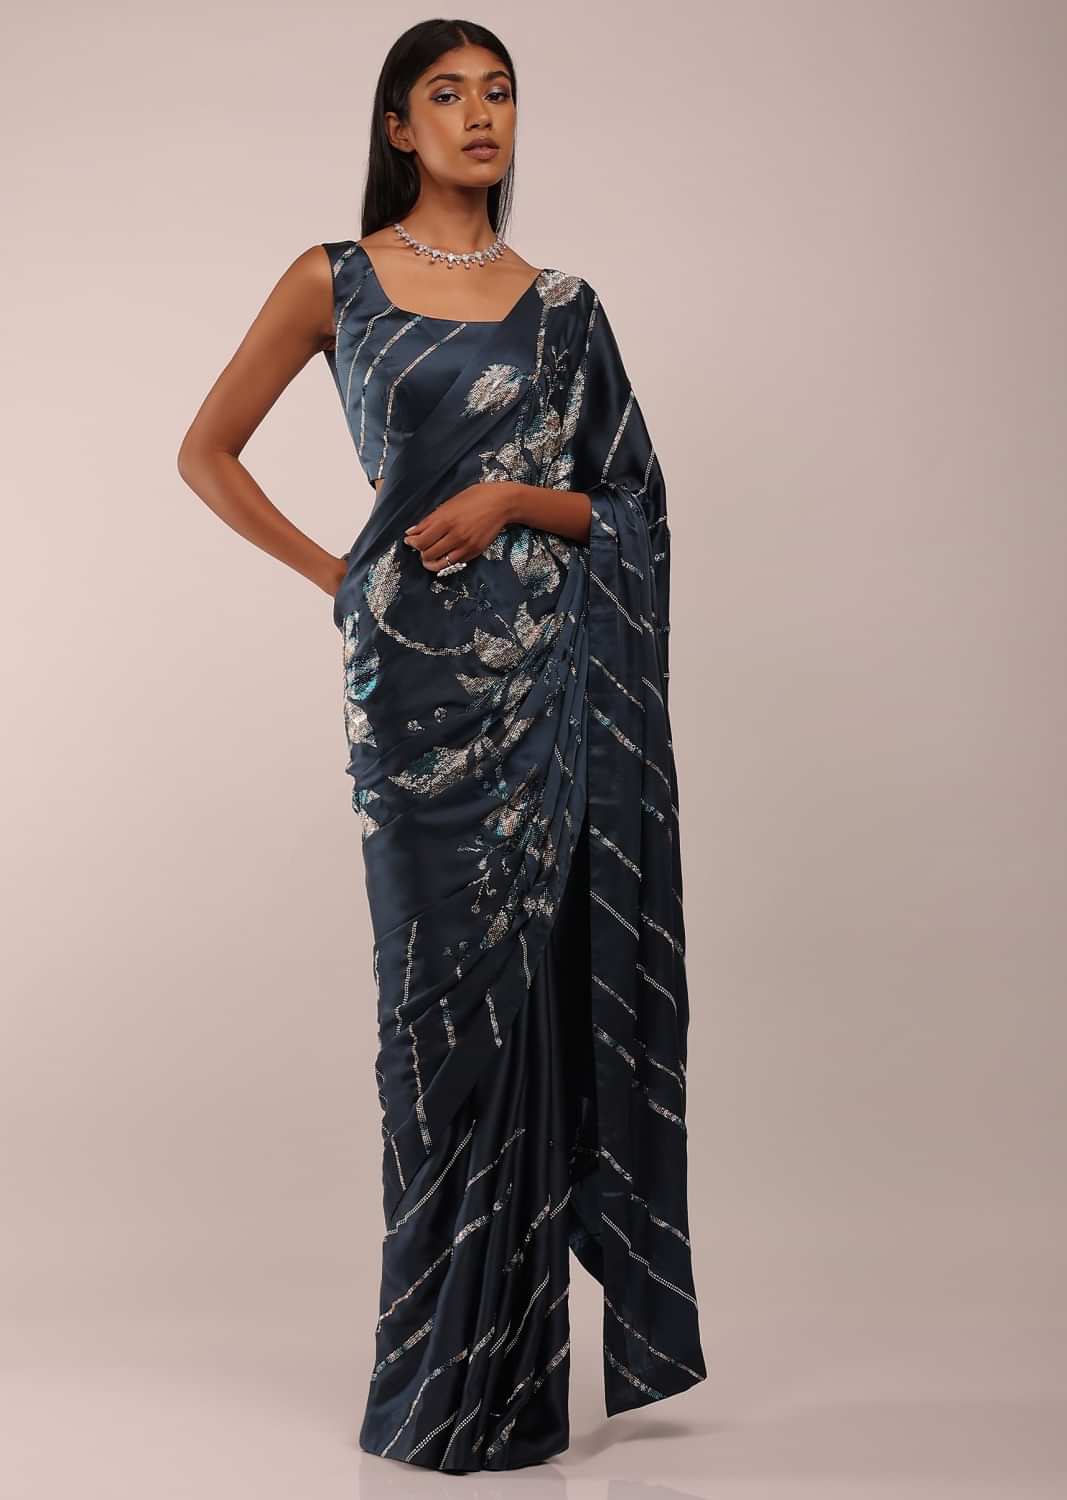 Orion Blue Satin Saree With Multi-Color Beads Embellished In Massive Floral Motifs With Beads In Horizontal Lines